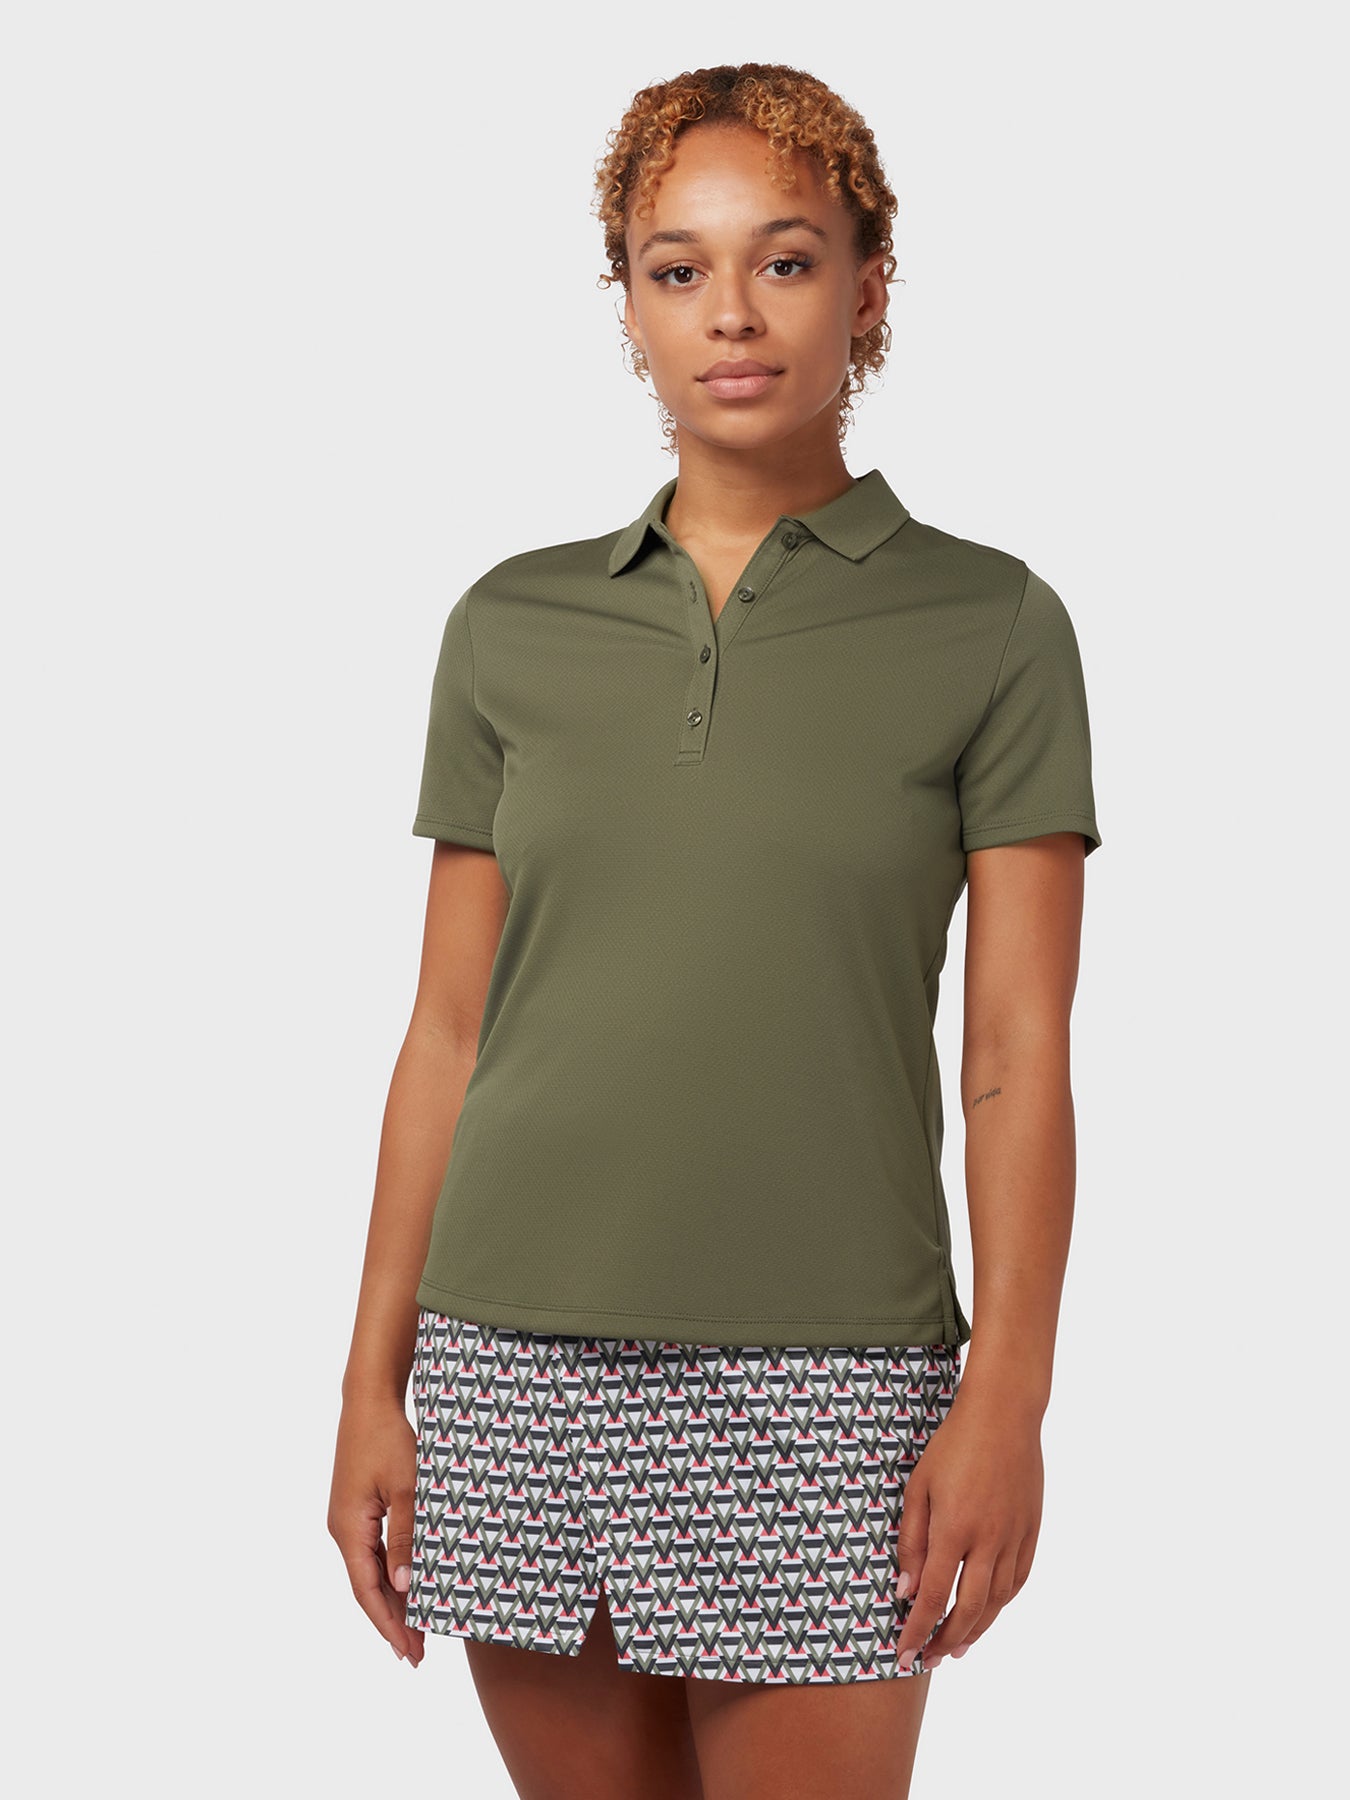 View Swing Tech Womens Polo In Industrial Green Industrial Green M information